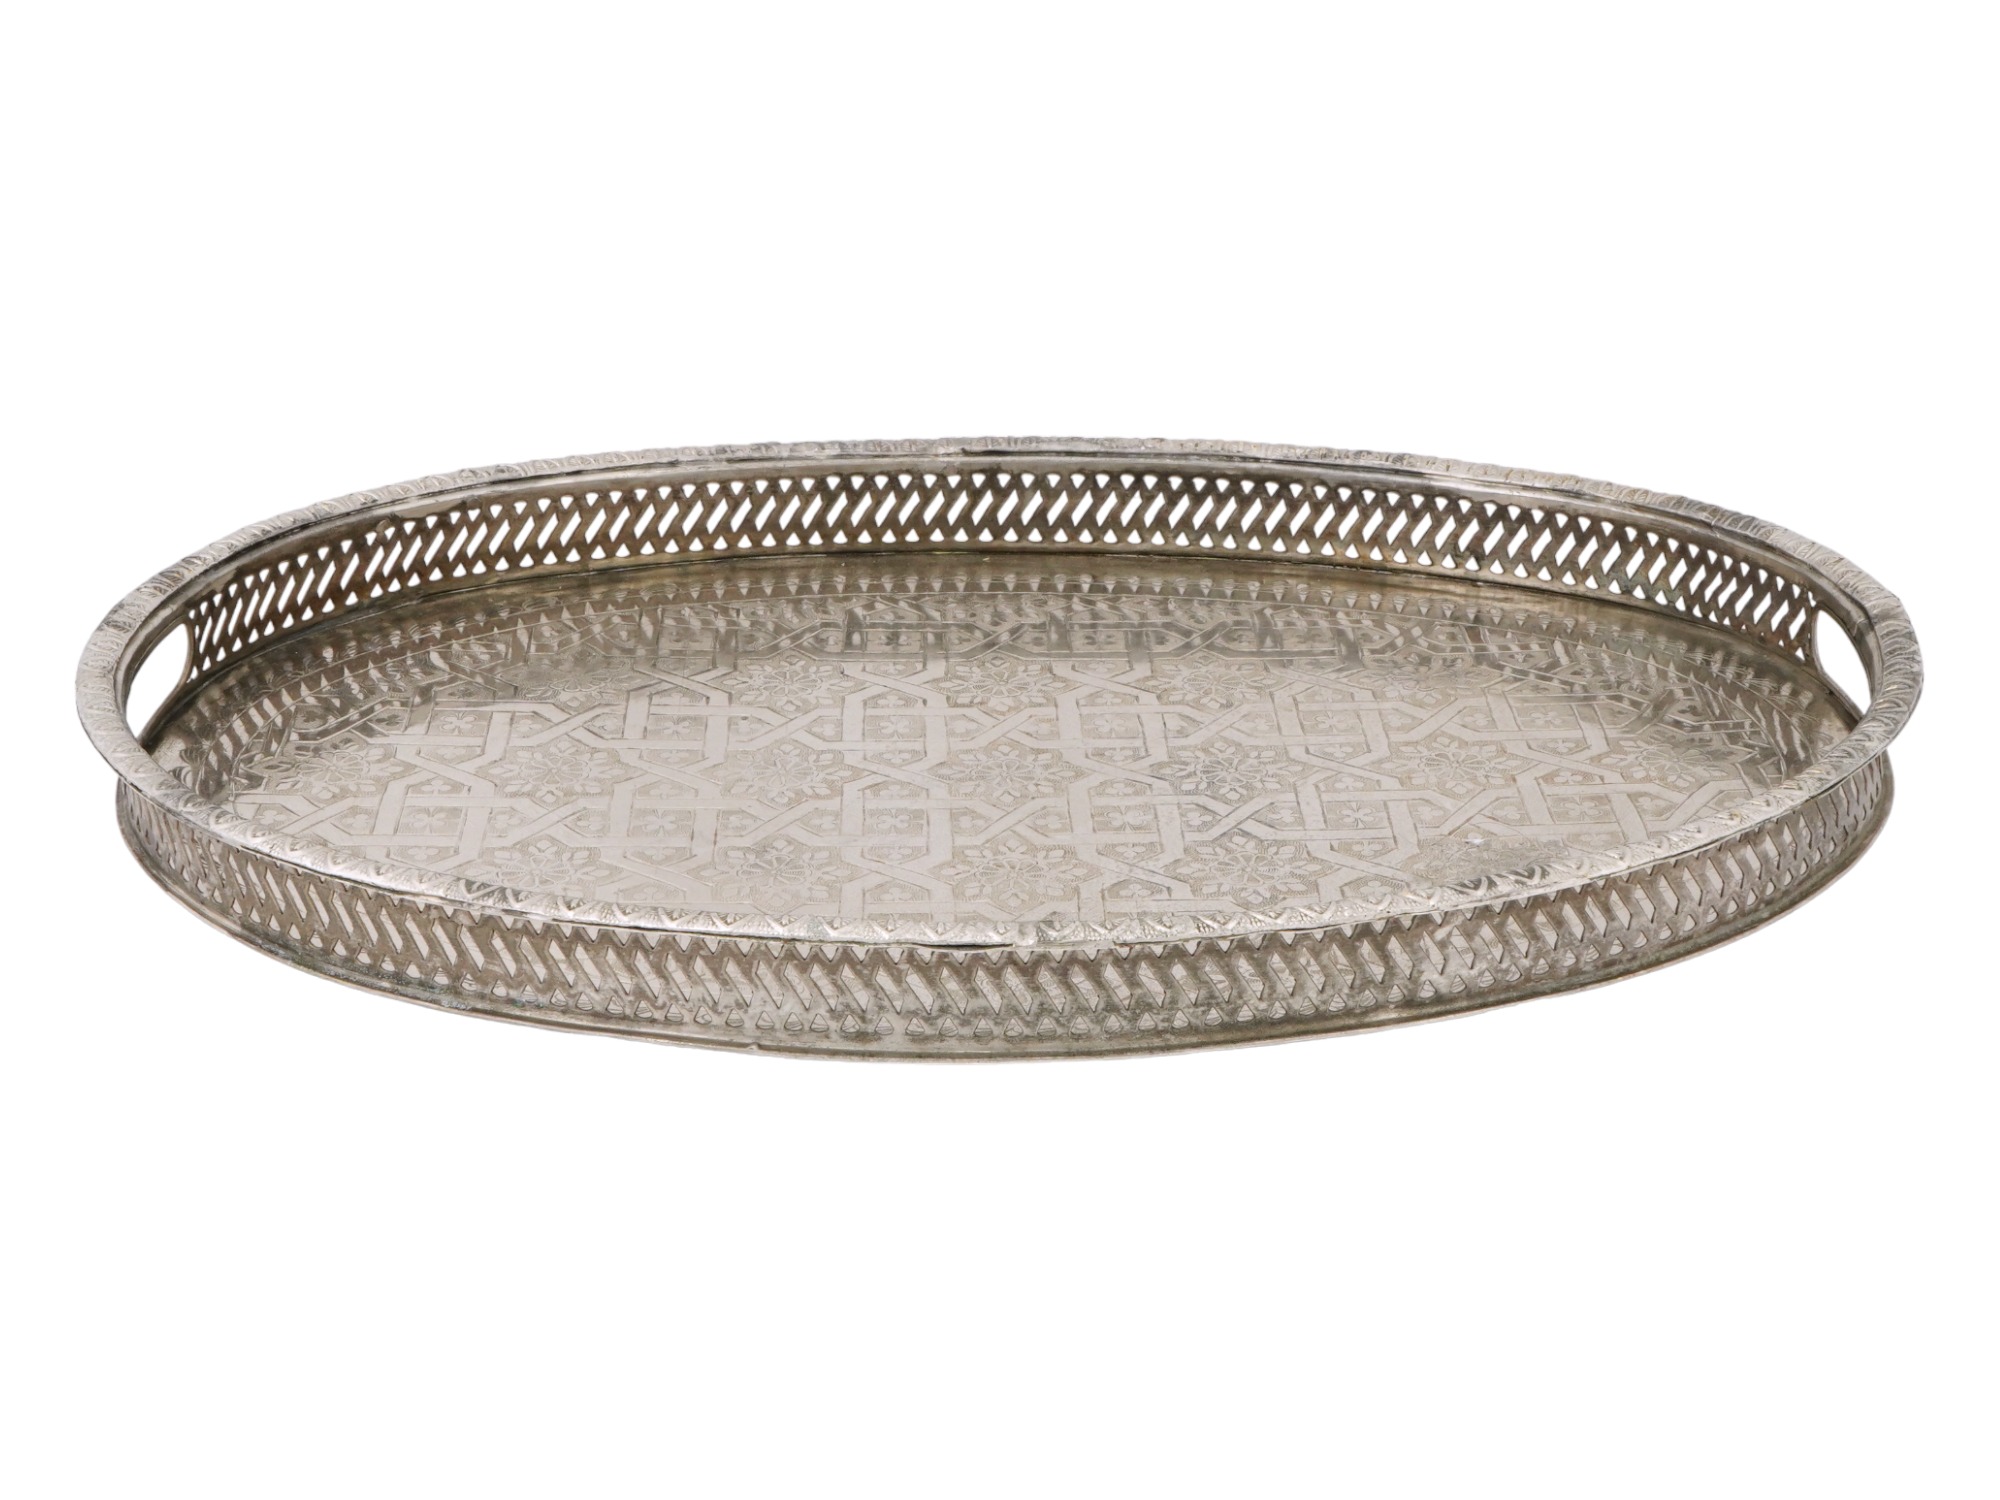 VINTAGE OVAL MOROCCAN STERLING SILVER TRAY PIC-0